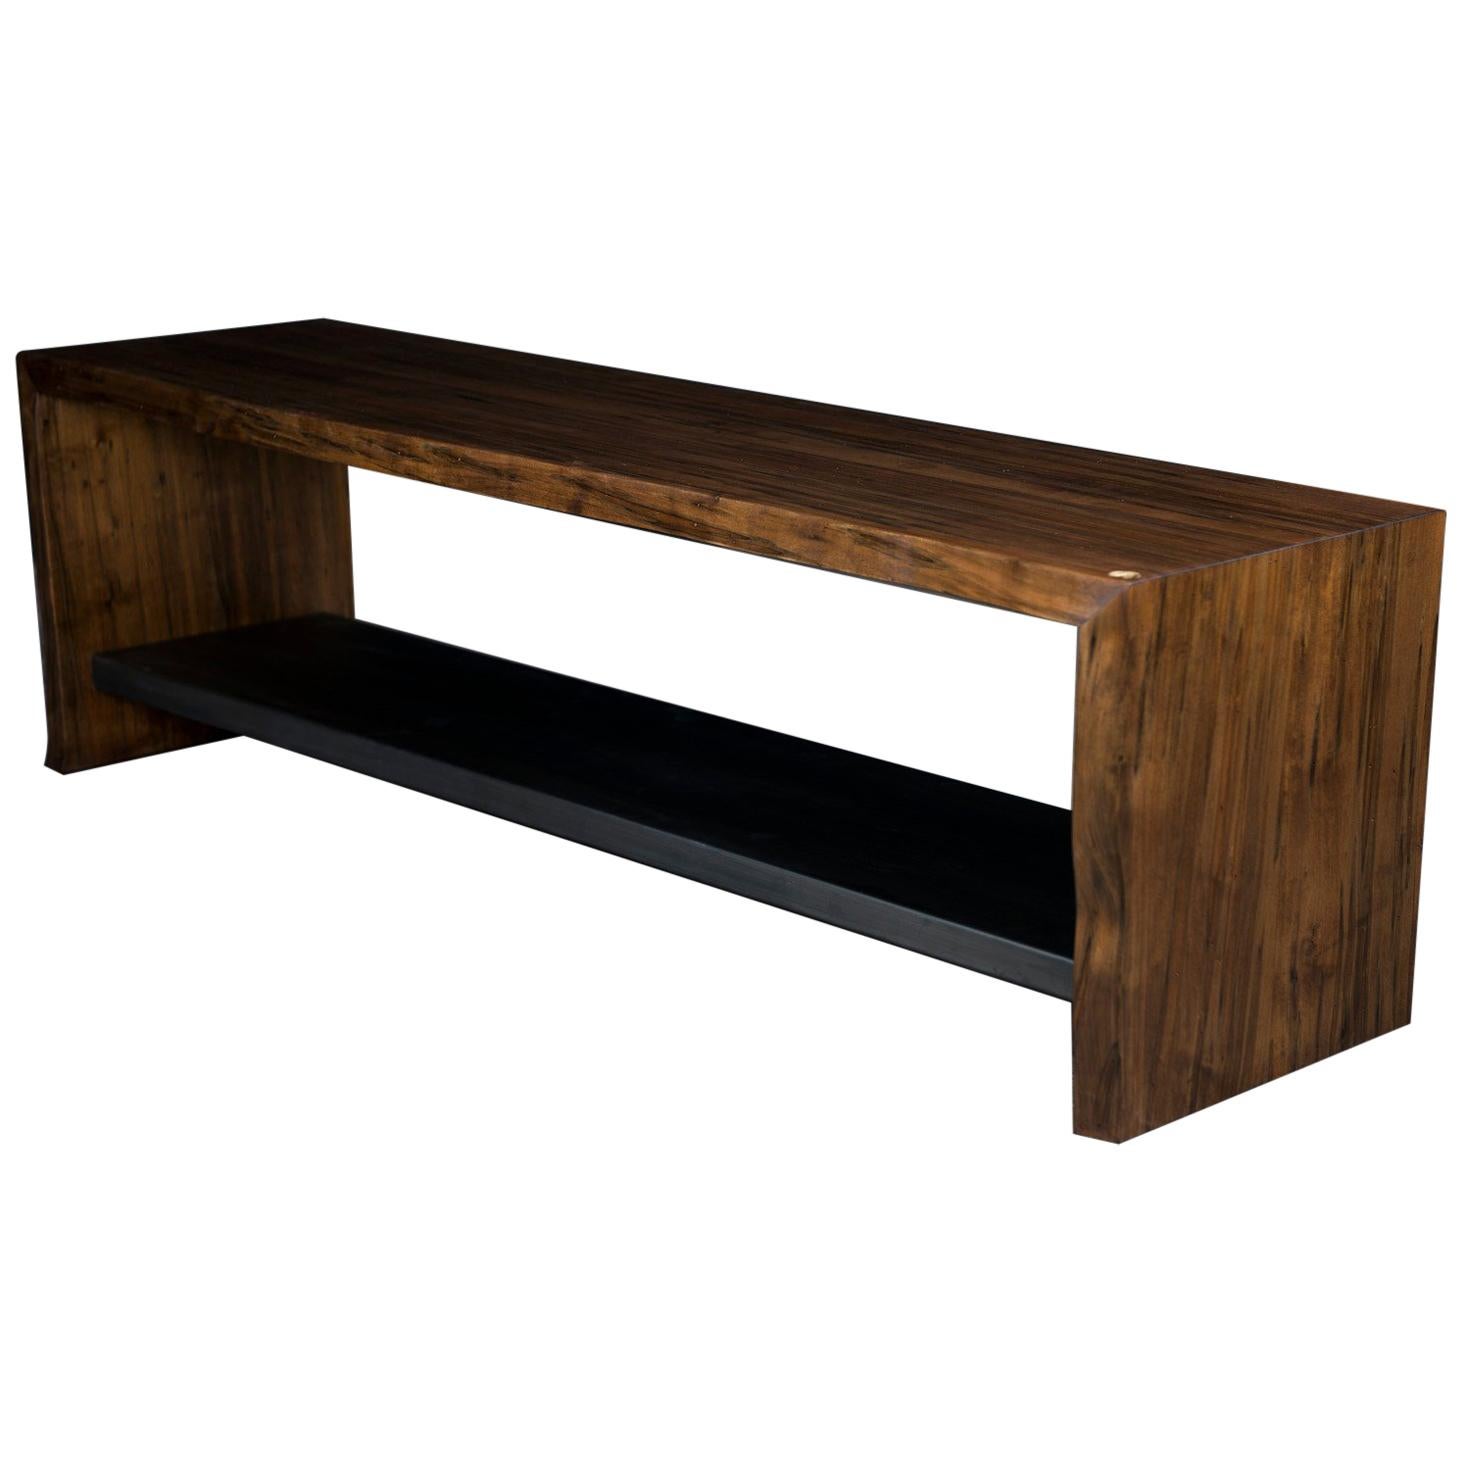 Live Edge Wood Bench, by Ambrozia, Oxidized Ambrosia Maple and Blackened Steel For Sale